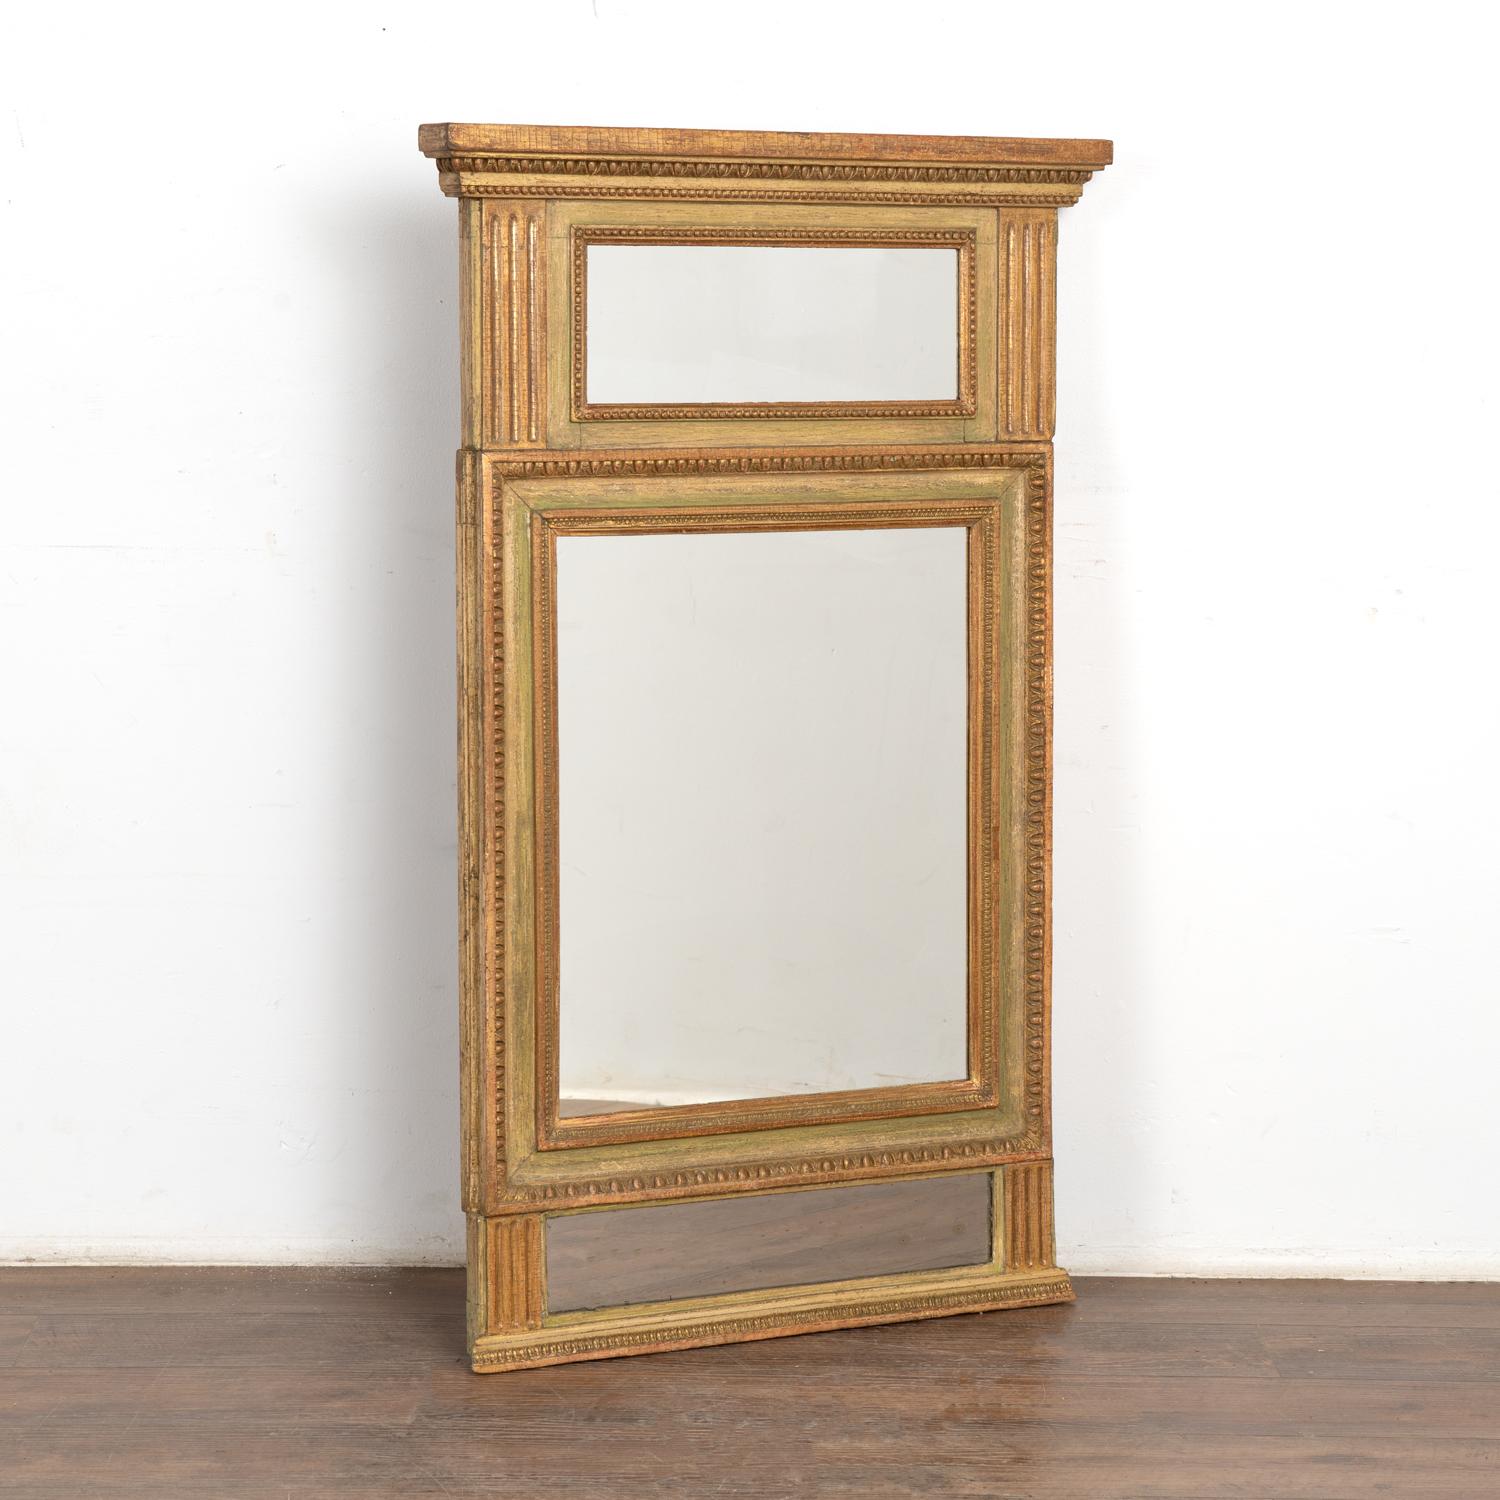 Lovely trumeau mirror painted in soft shades of green, pale red, and gold.
At just under 4' tall, its size allows it to be displayed in a wide variety of spaces.
In solid condition ready to be hung and enjoyed.
All scratches, cracks, dings, nicks,